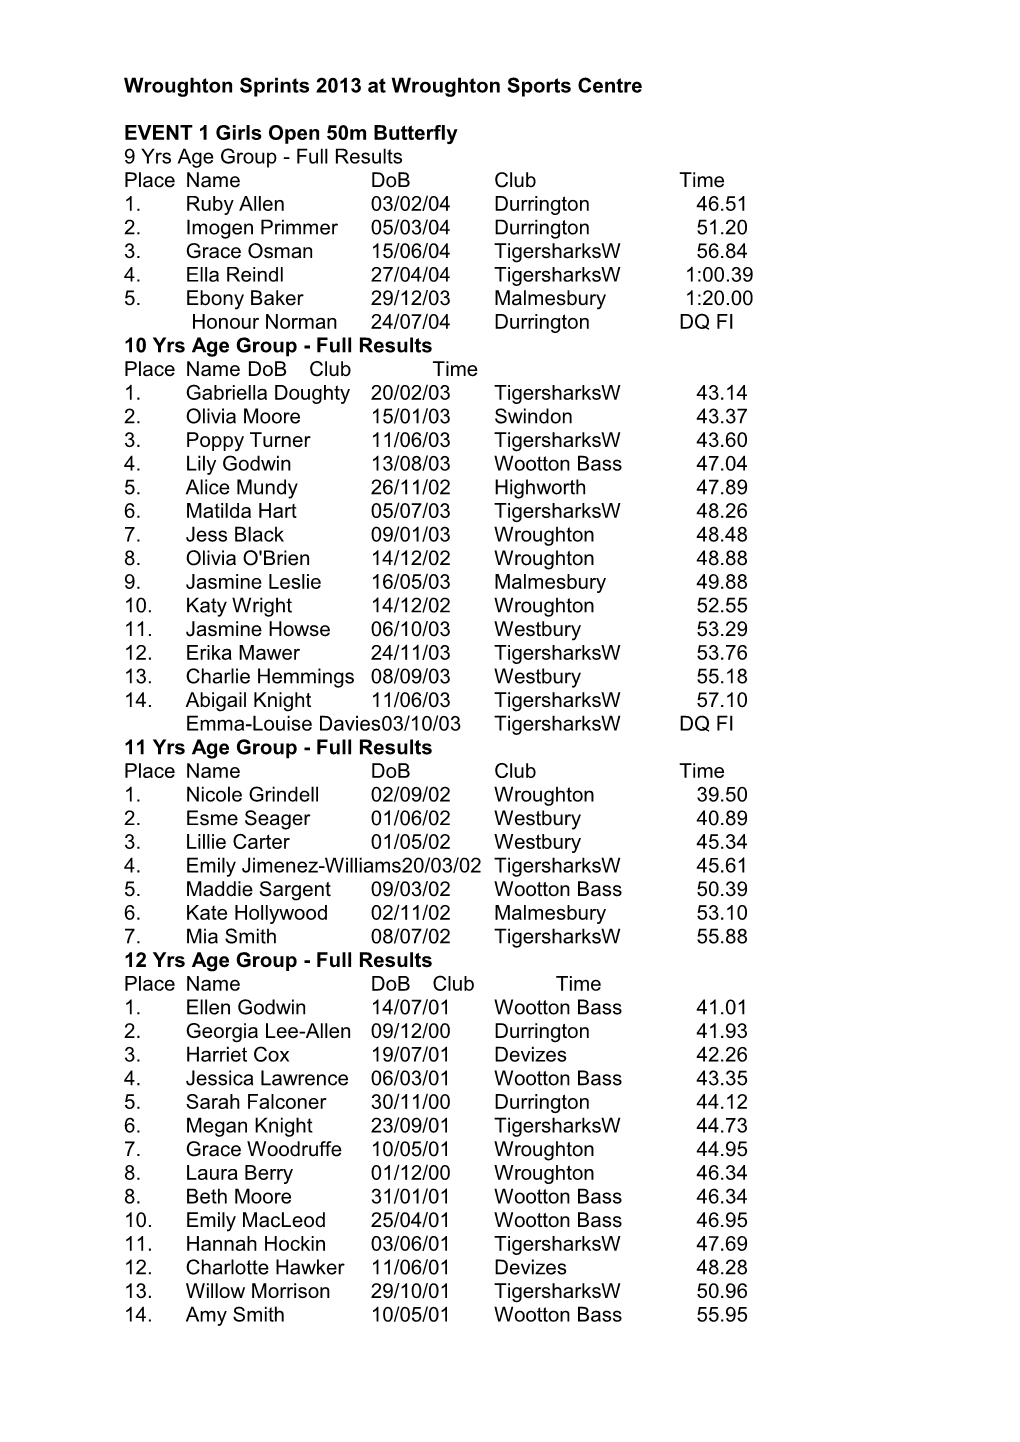 Full Results Place Name Dob Club Time 1